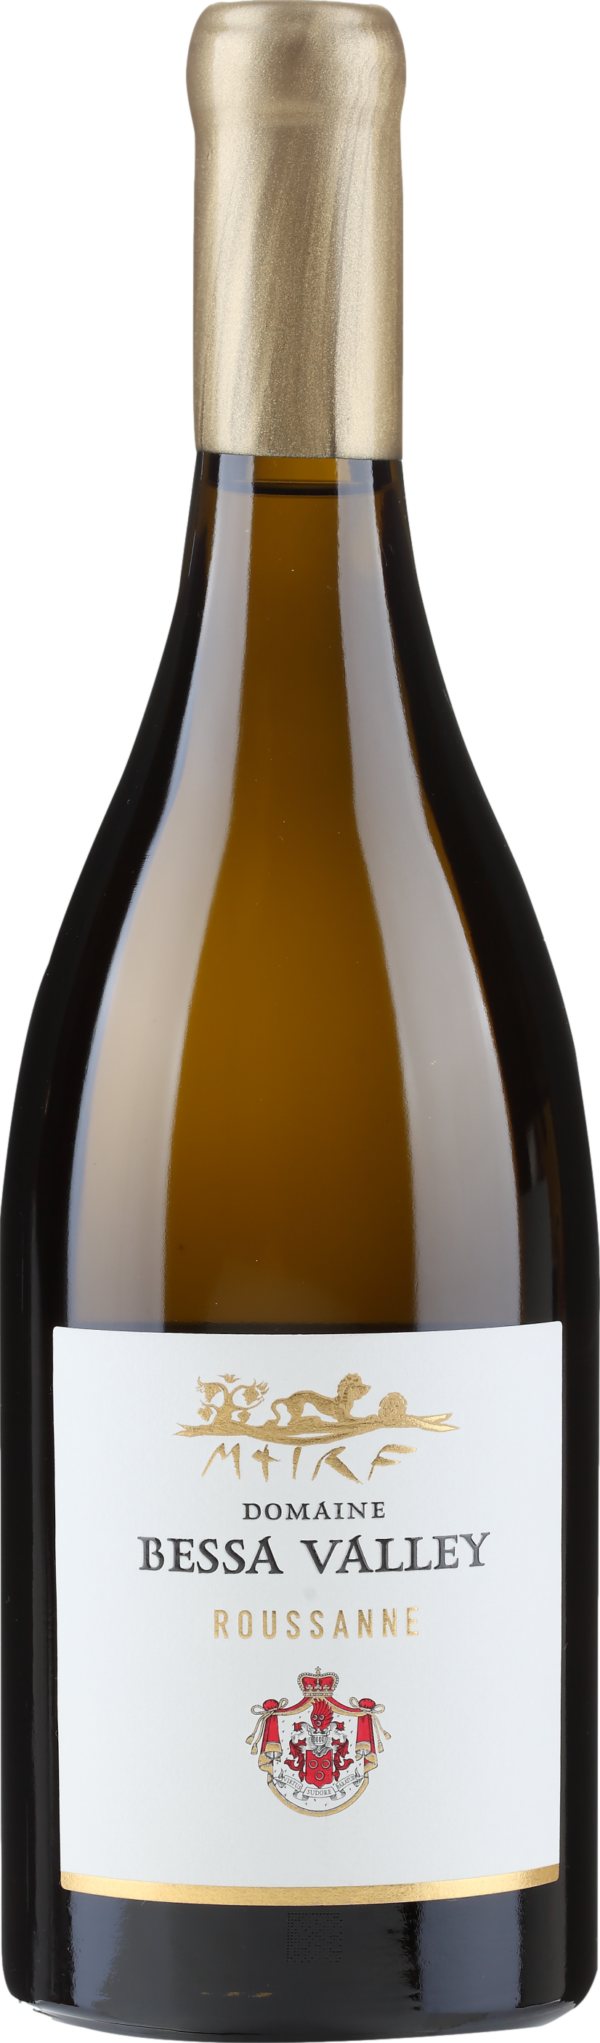 Product image of Bessa Valley Roussanne 2020 from 8wines